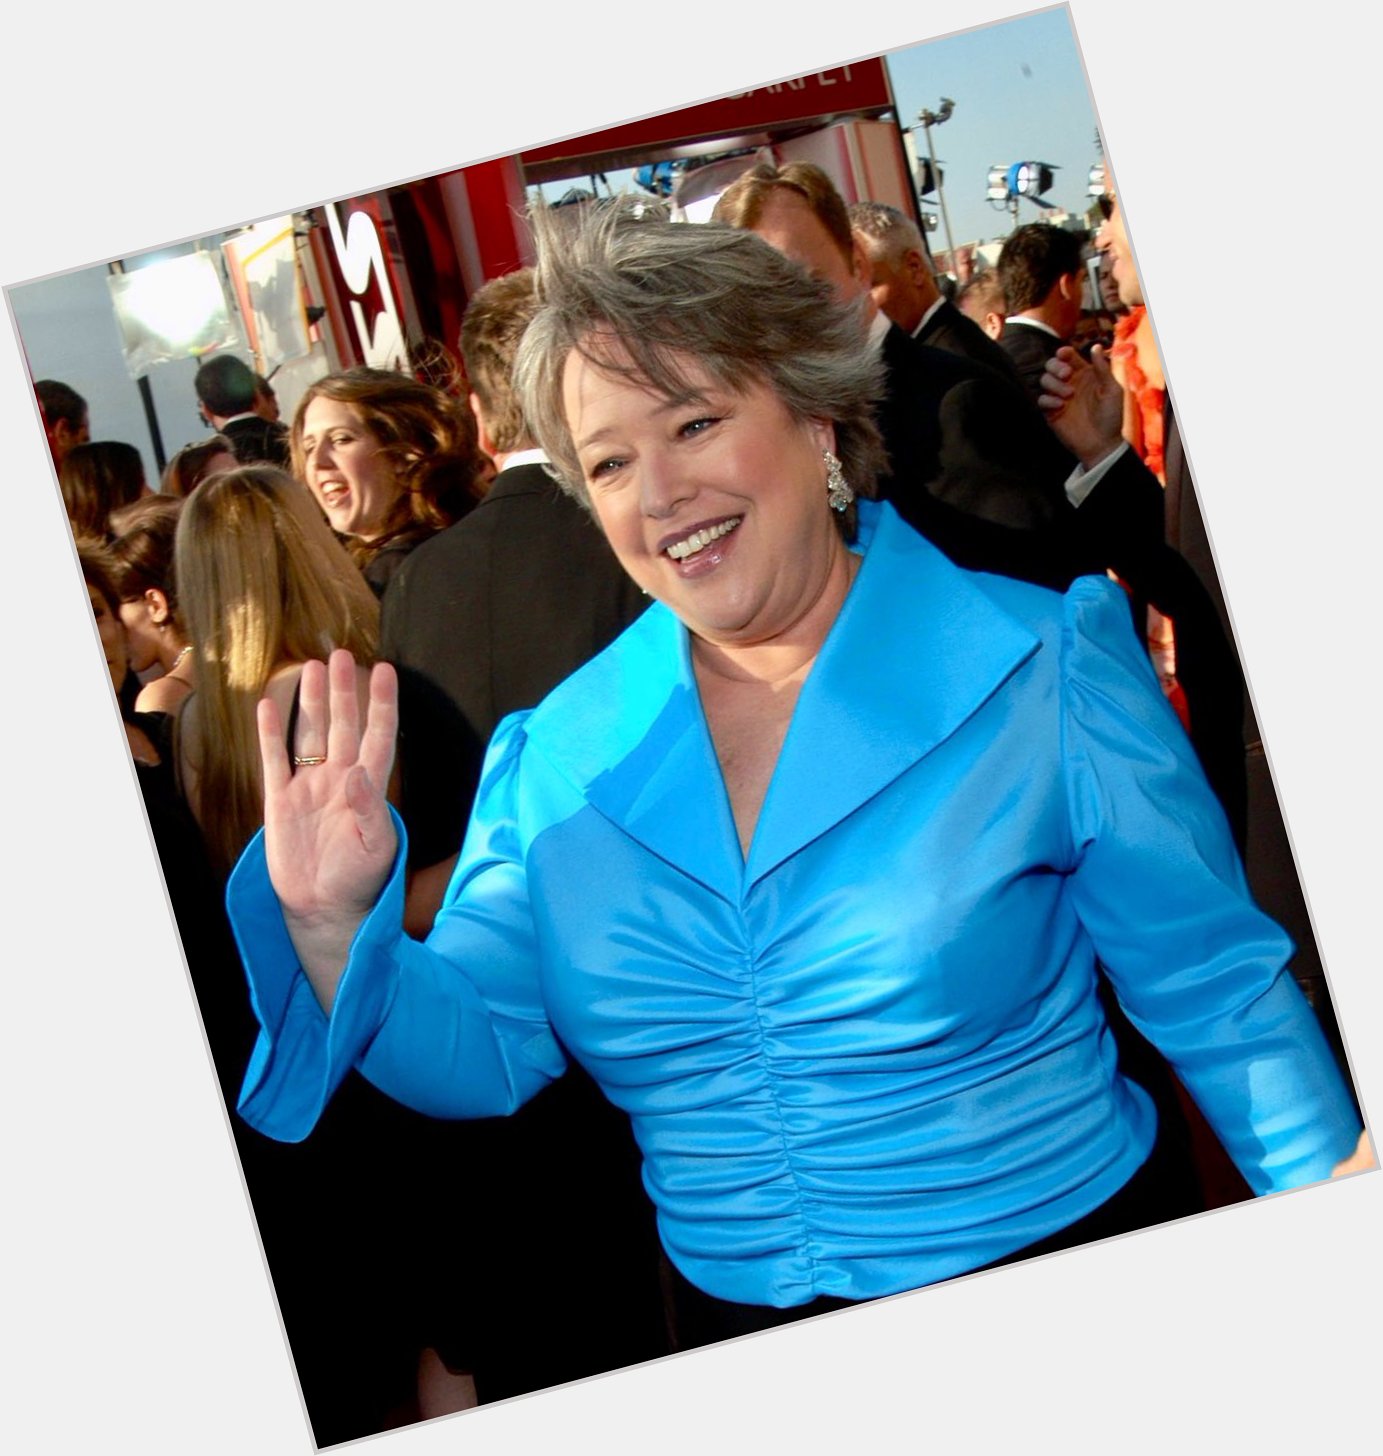  I love Kathy Bates. Happy 74th Birthday to her. Wishing her many more.  June 28, 1948 